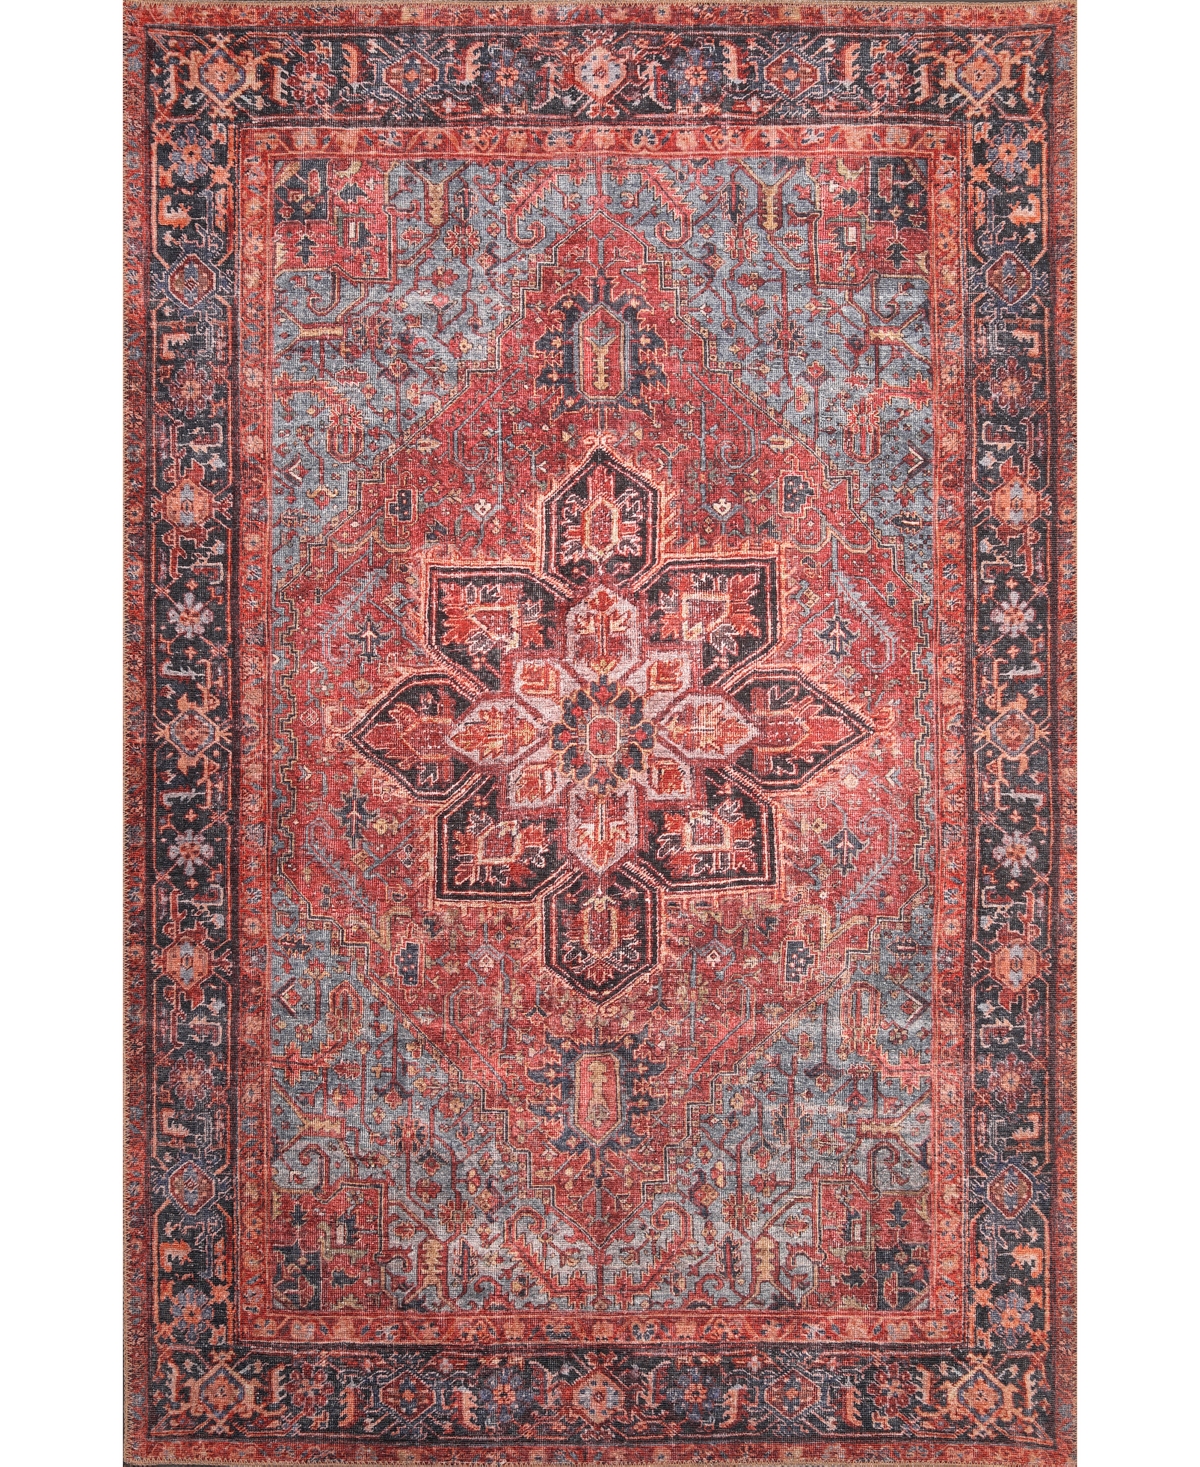 Kas London Machine Washable 4805 3'9" X 5'6" Area Rug In Red